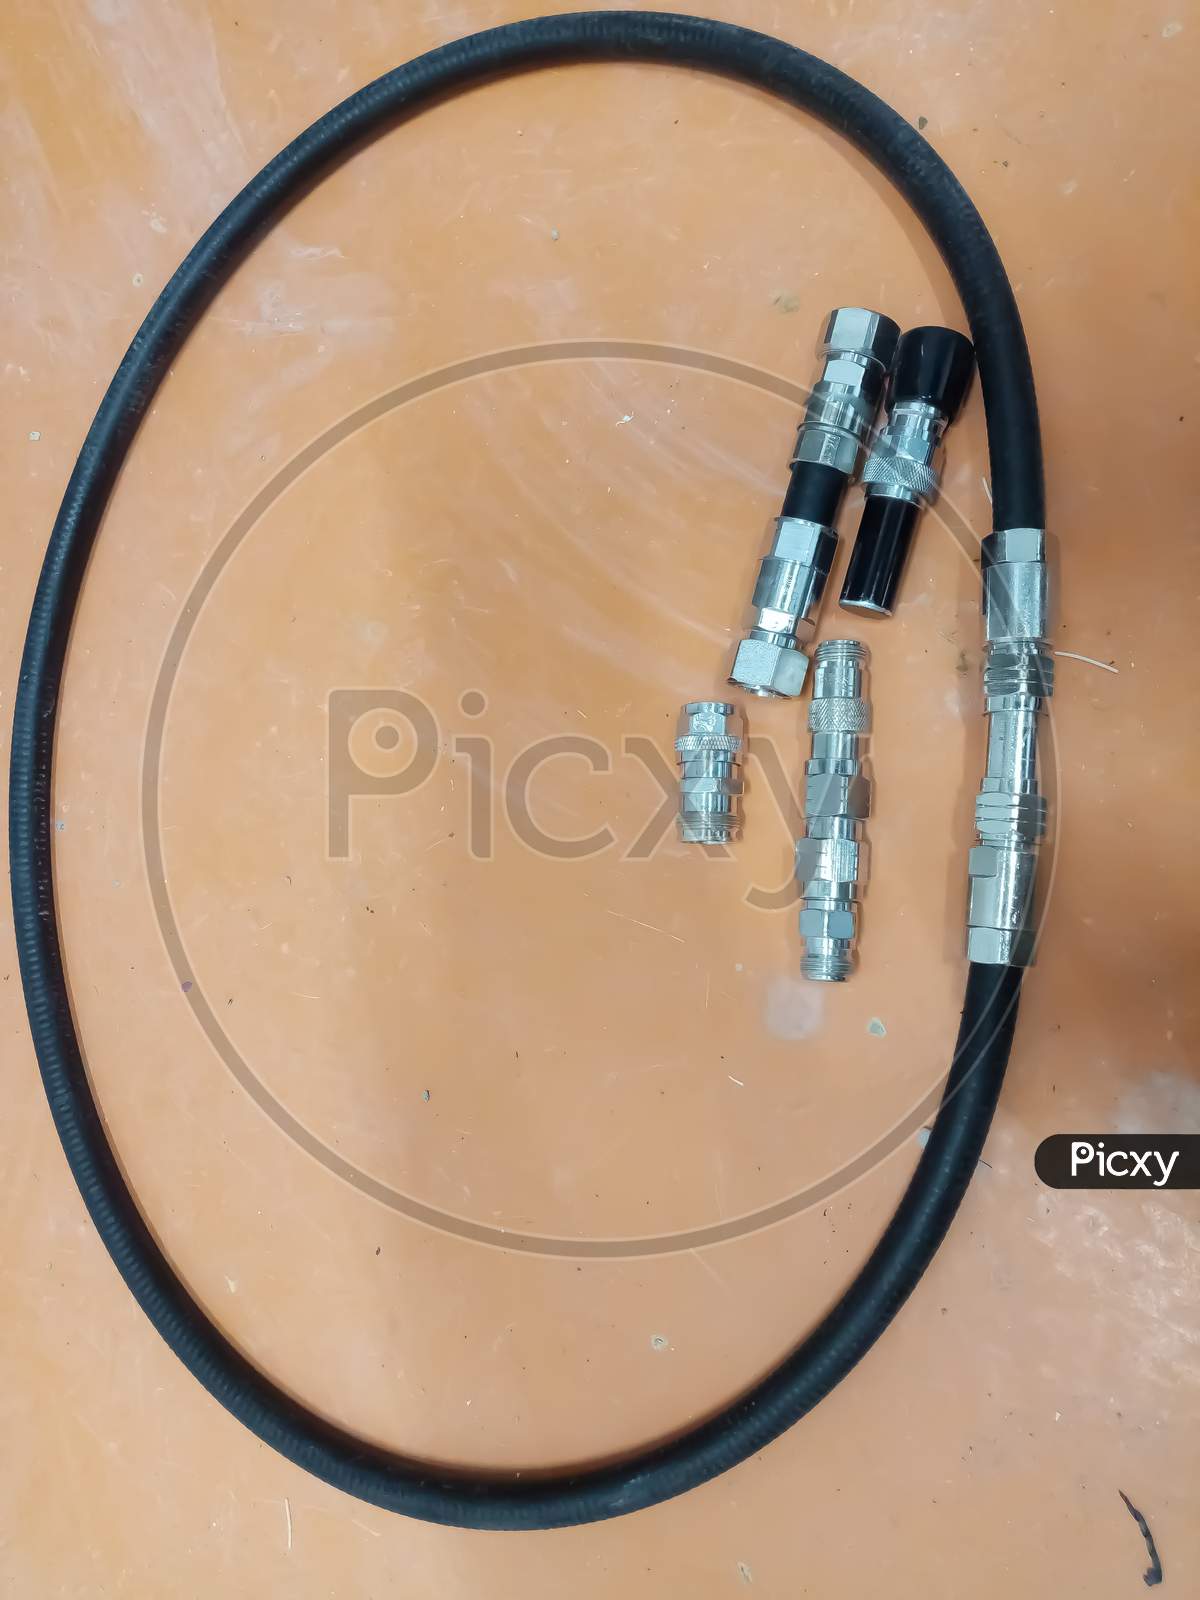 A networking cable with nuts and bolts